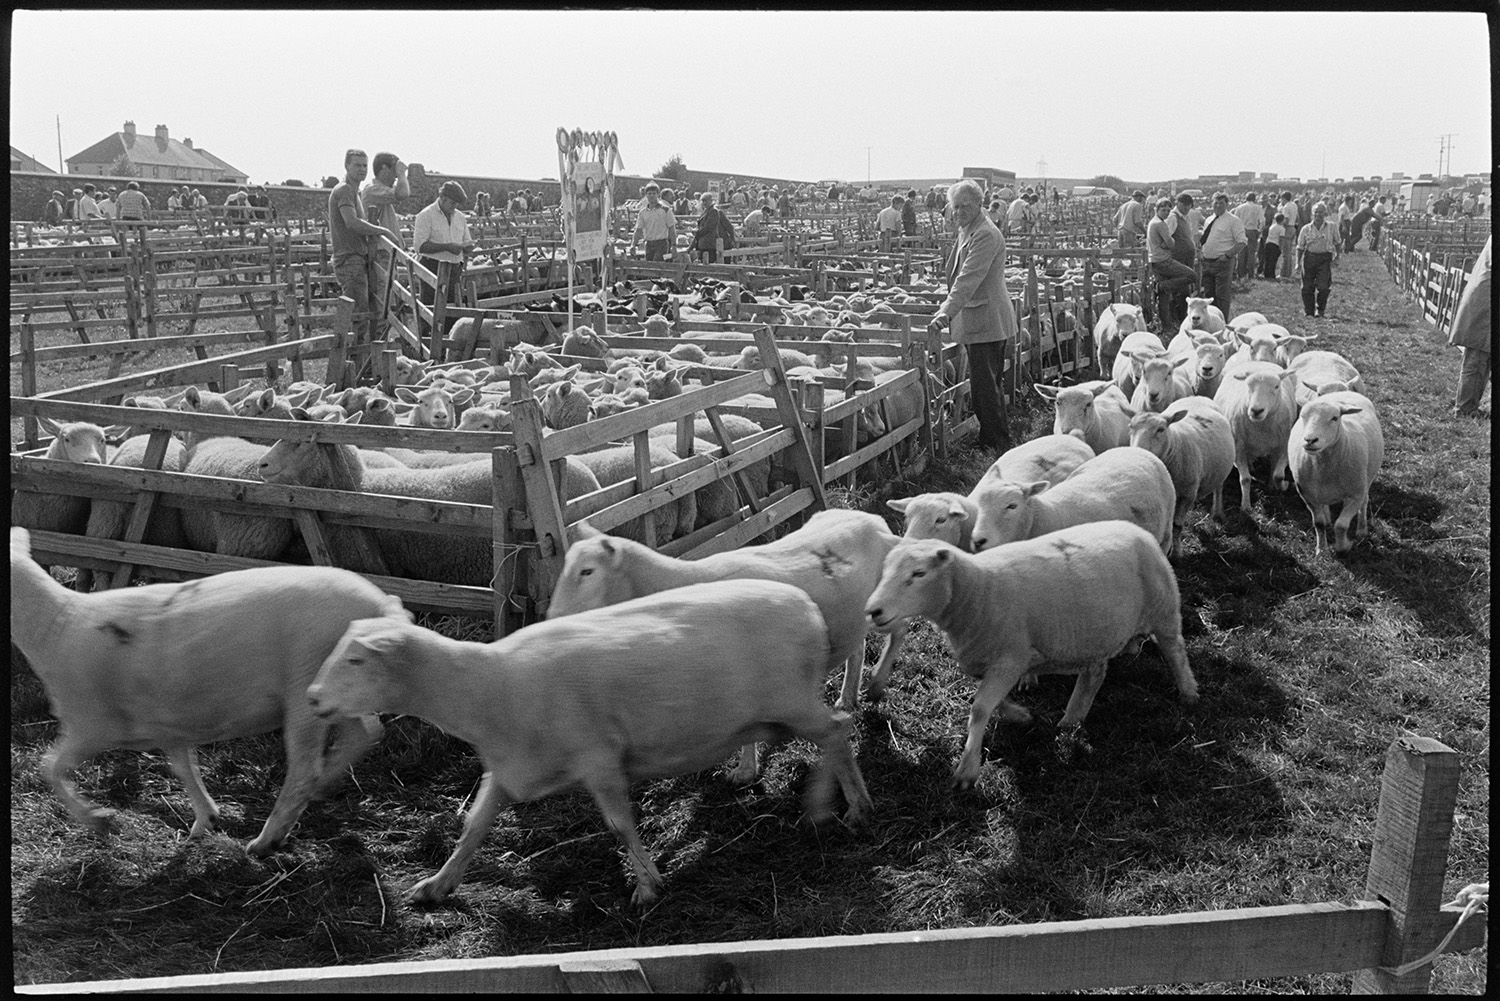 View over pens at sheep fair. <br />
[Sheep being moved at South Molton Sheep Fair. People are looking at sheep in wooden pens in the background. One of the pens has a stand with rosettes attached to it.]